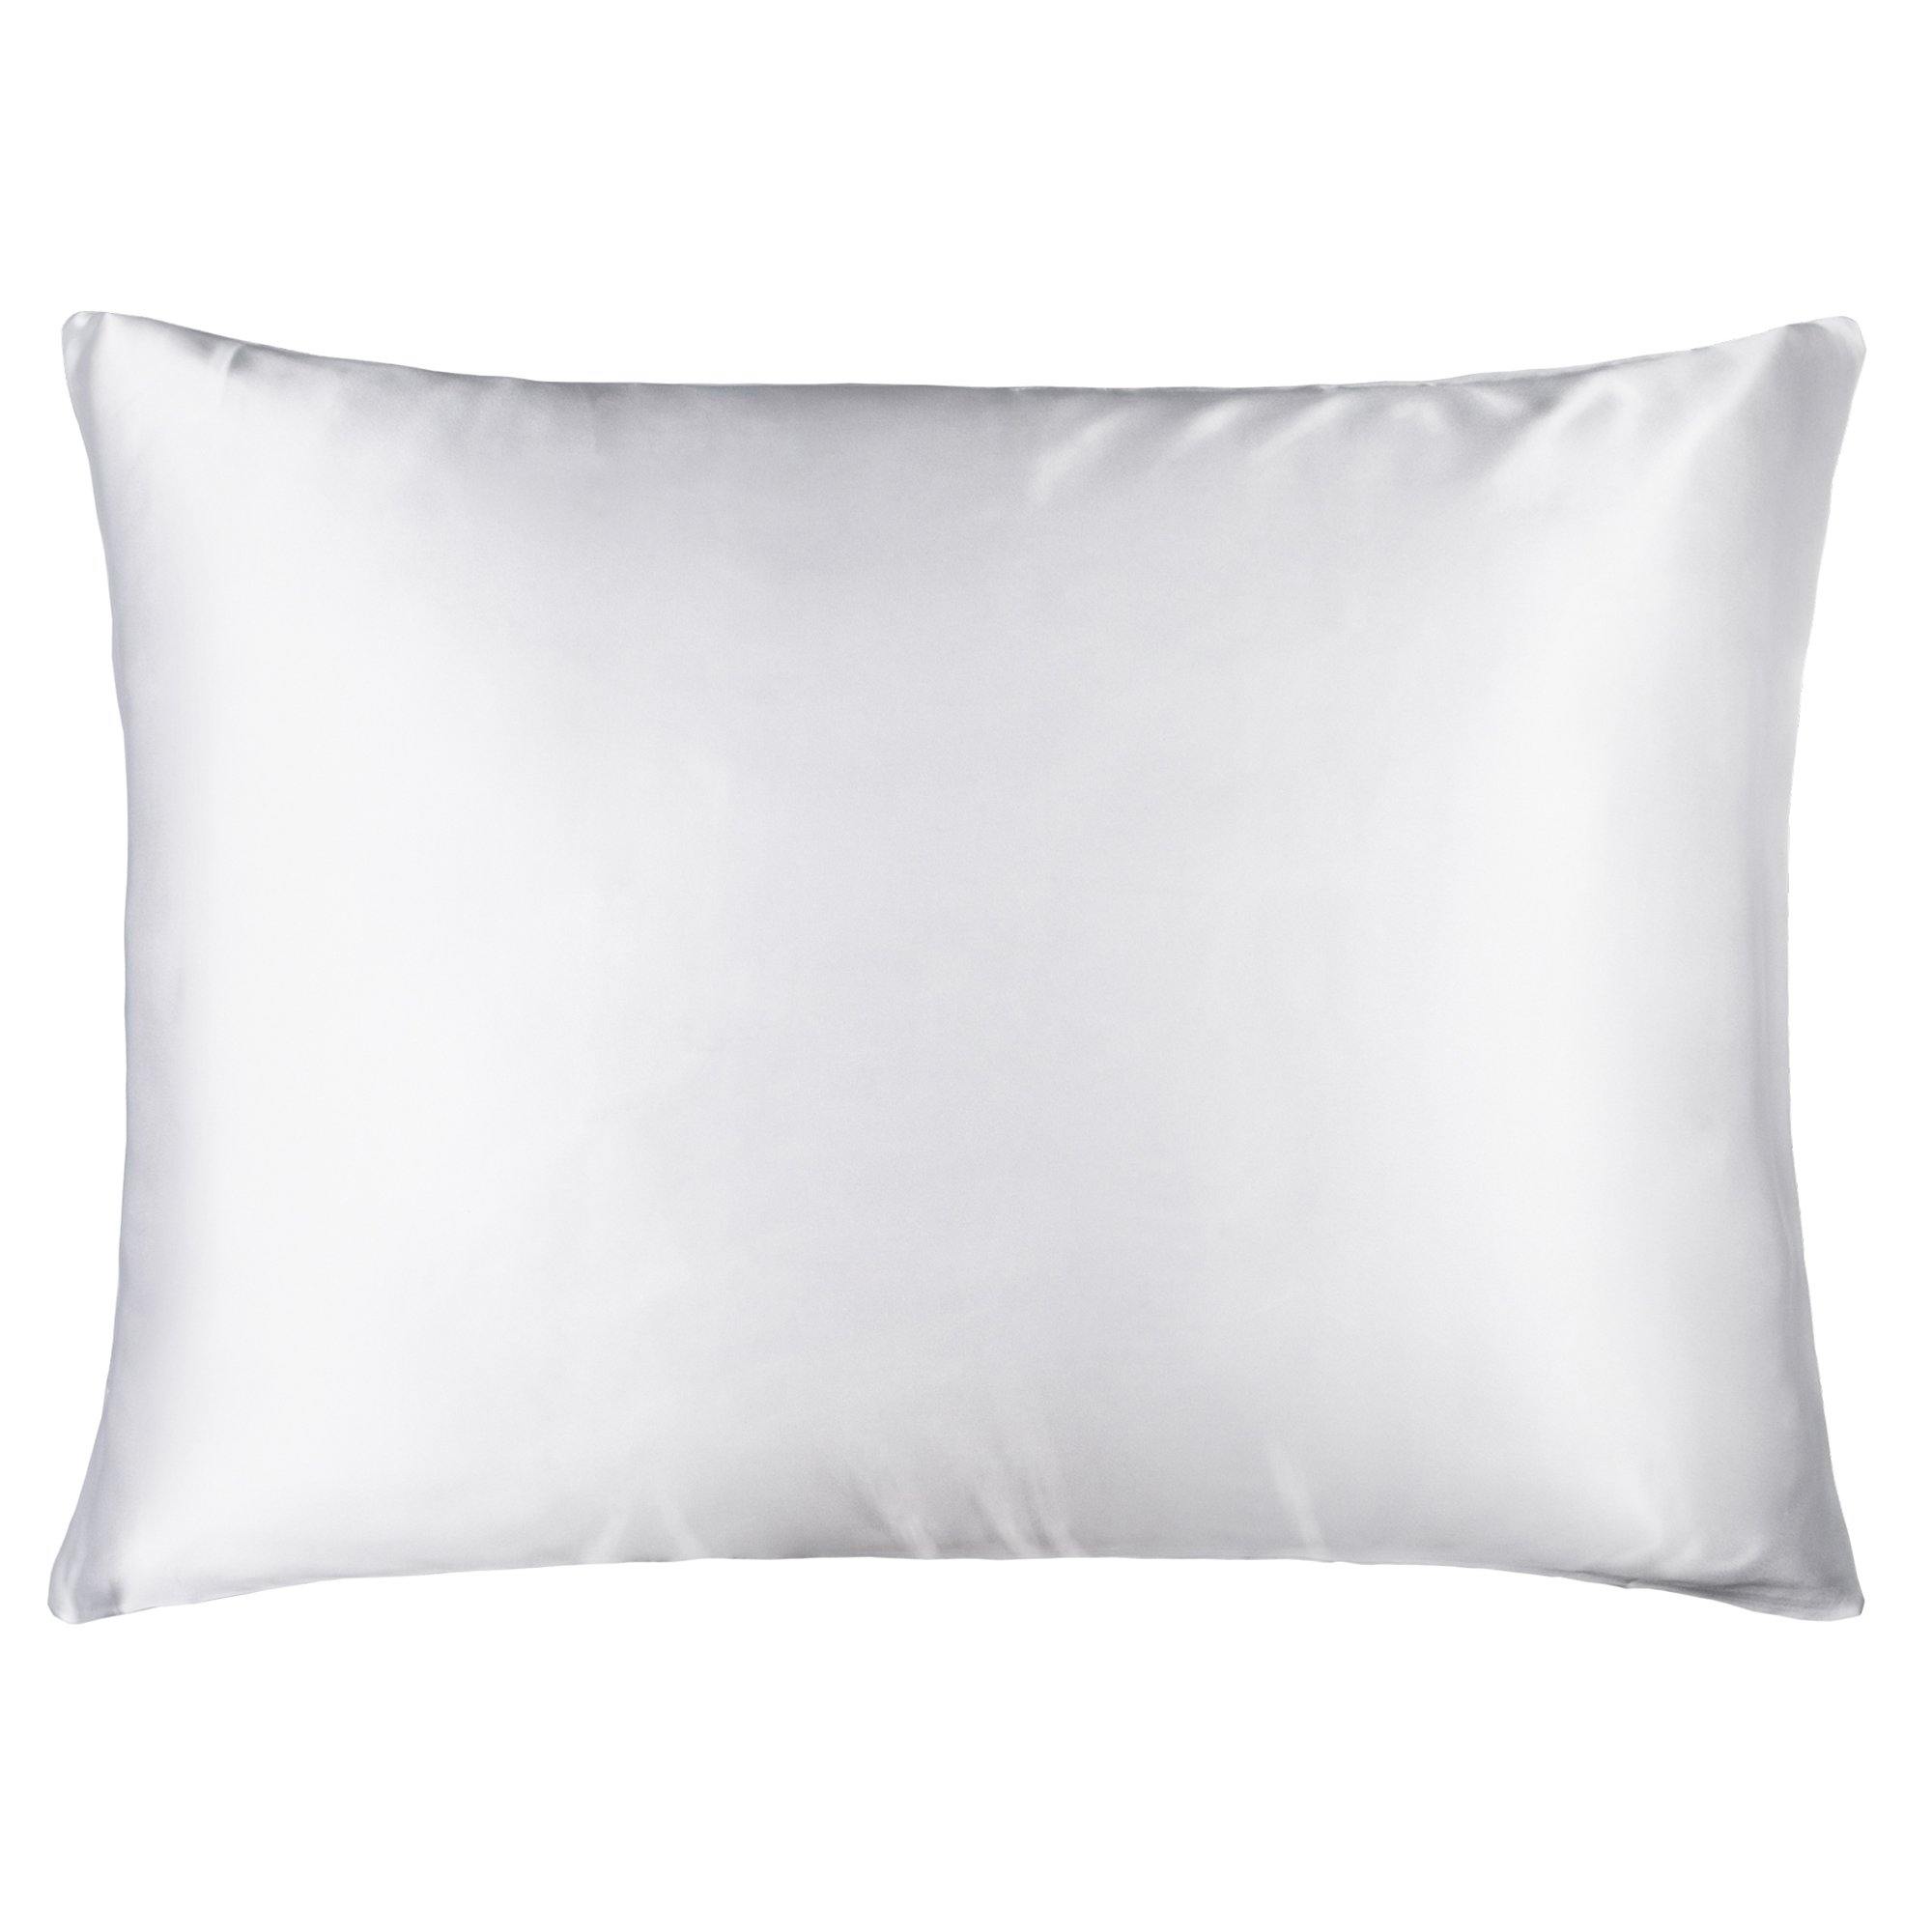 100% Pure Silk Pillowcases, 30 Momme Mulberry Silk